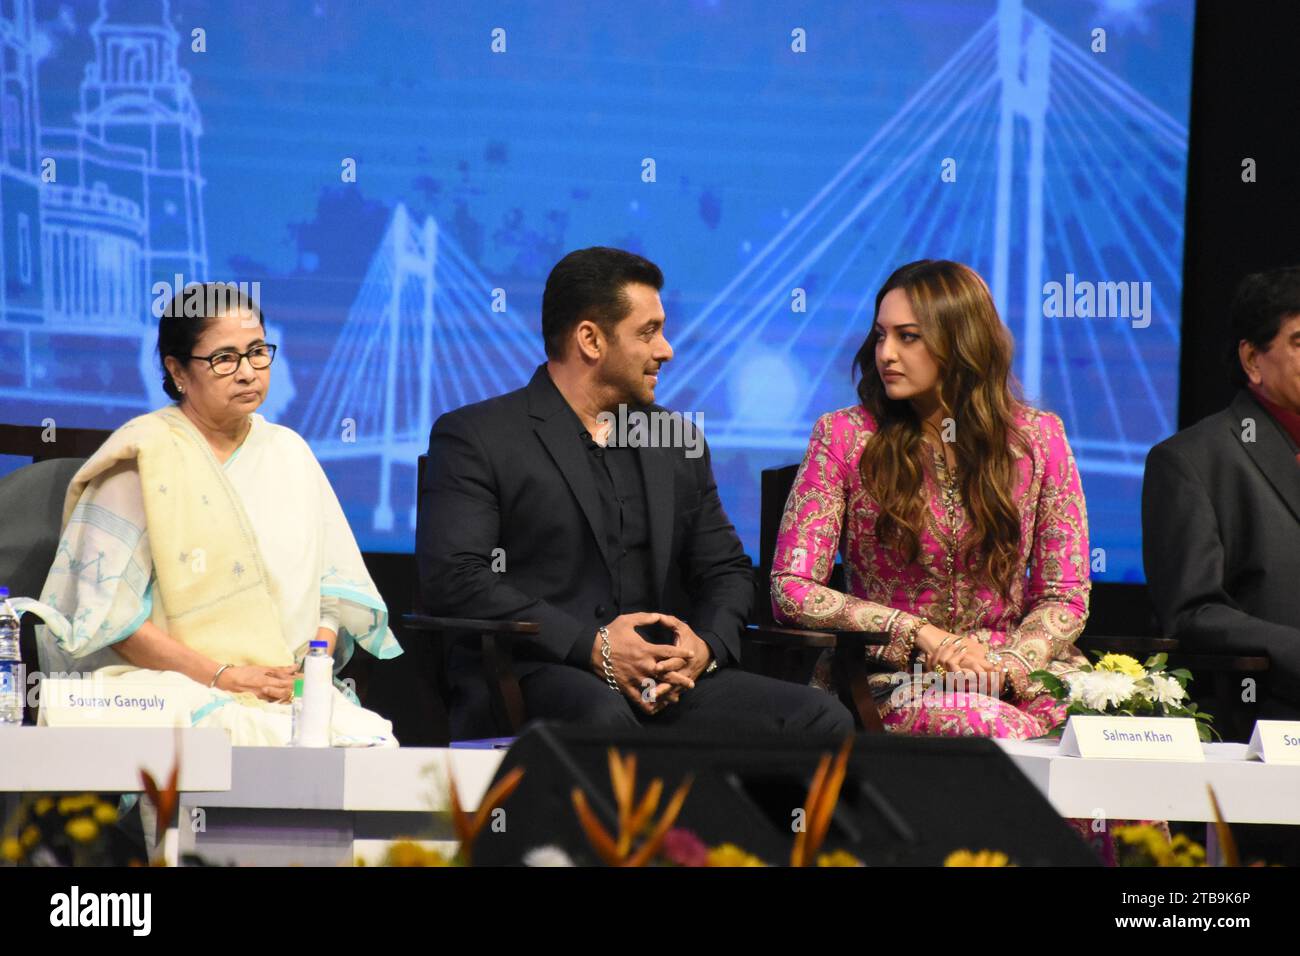 Kolkata, West Bengal, India. 5th Dec, 2023. Mamata Banerjee, Chief Minister of West Bengal (L), Bollywood star actor Salman Khan (M), and Bollywood actress Sonakshi Sinha at the inaugural function of the 29th edition of the Kolkata International Film Festival (KIFF 29), organized by the Information and Cultural Affairs Department, Government of West Bengal, which is scheduled to be held between 5 - 12 December, 2023 in Kolkata, the cultural capital of the State of West Bengal. this festival is accredited by the International Federation of Film Producers' Association or FIAPF. (Credit Image: Stock Photo